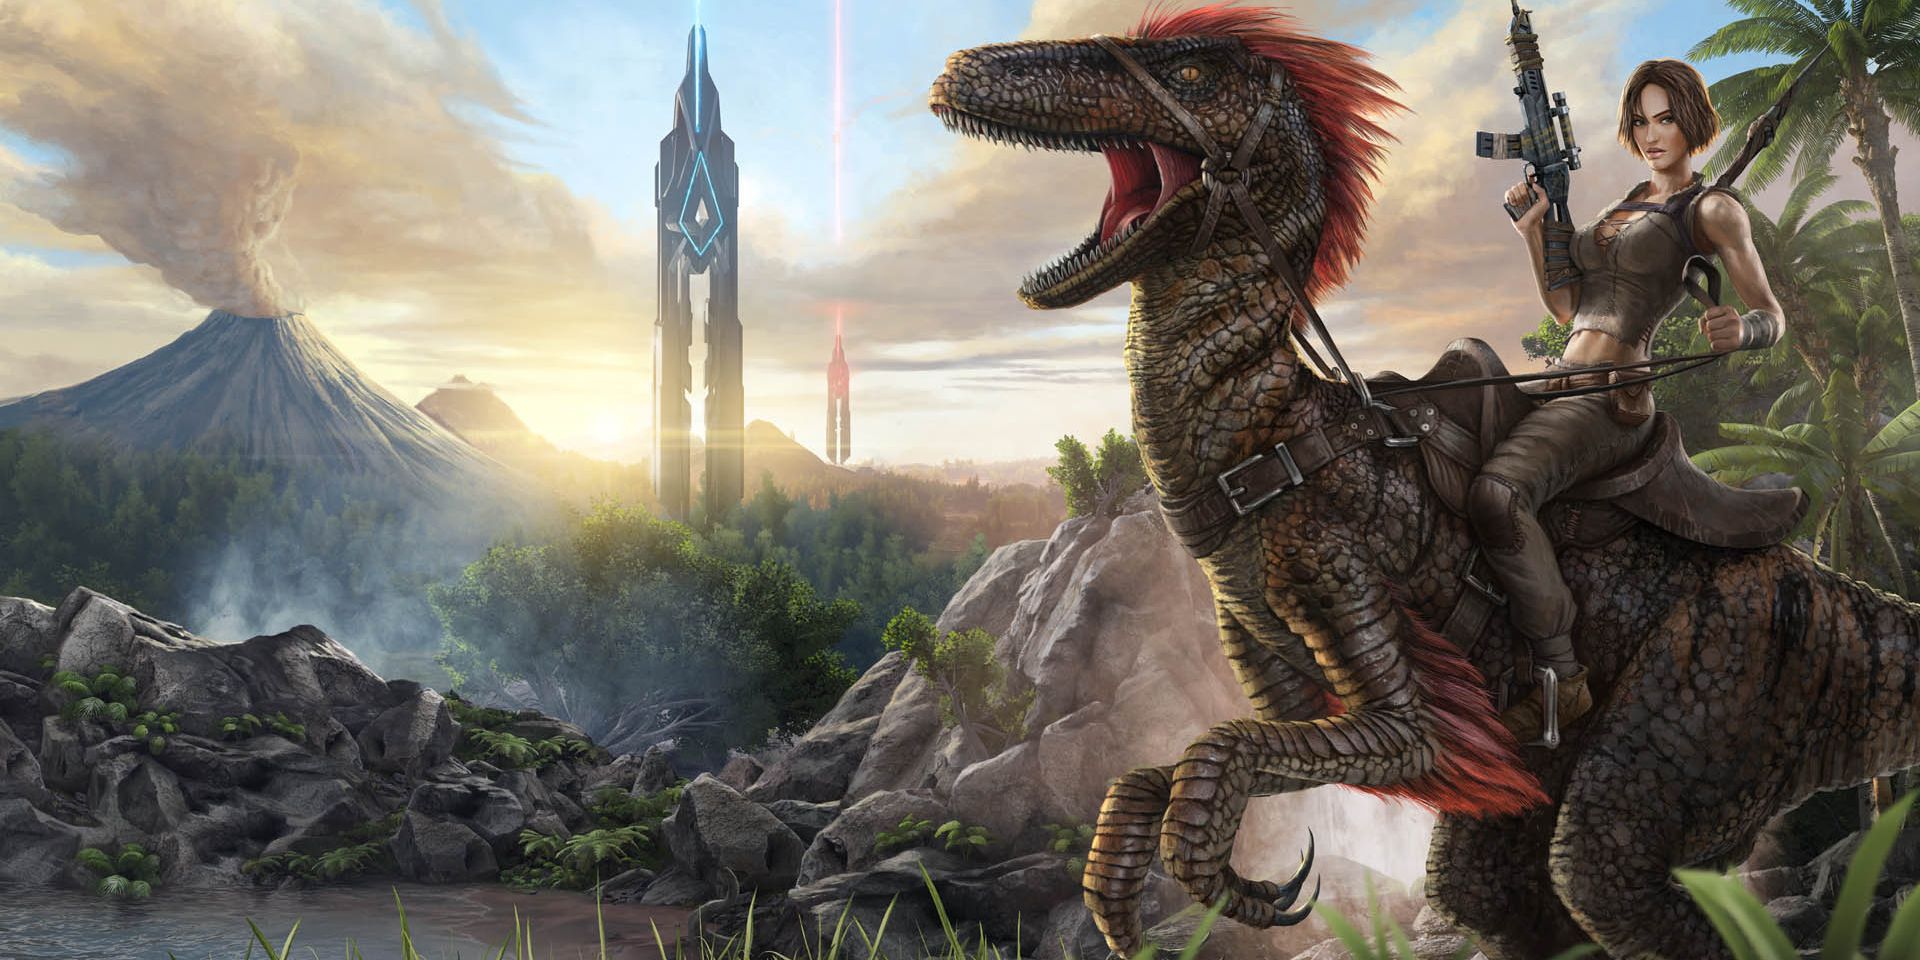 A player character sits astride a leering, bipedal dinosaur before distant mountains in key art from Ark: Survival Ascended.